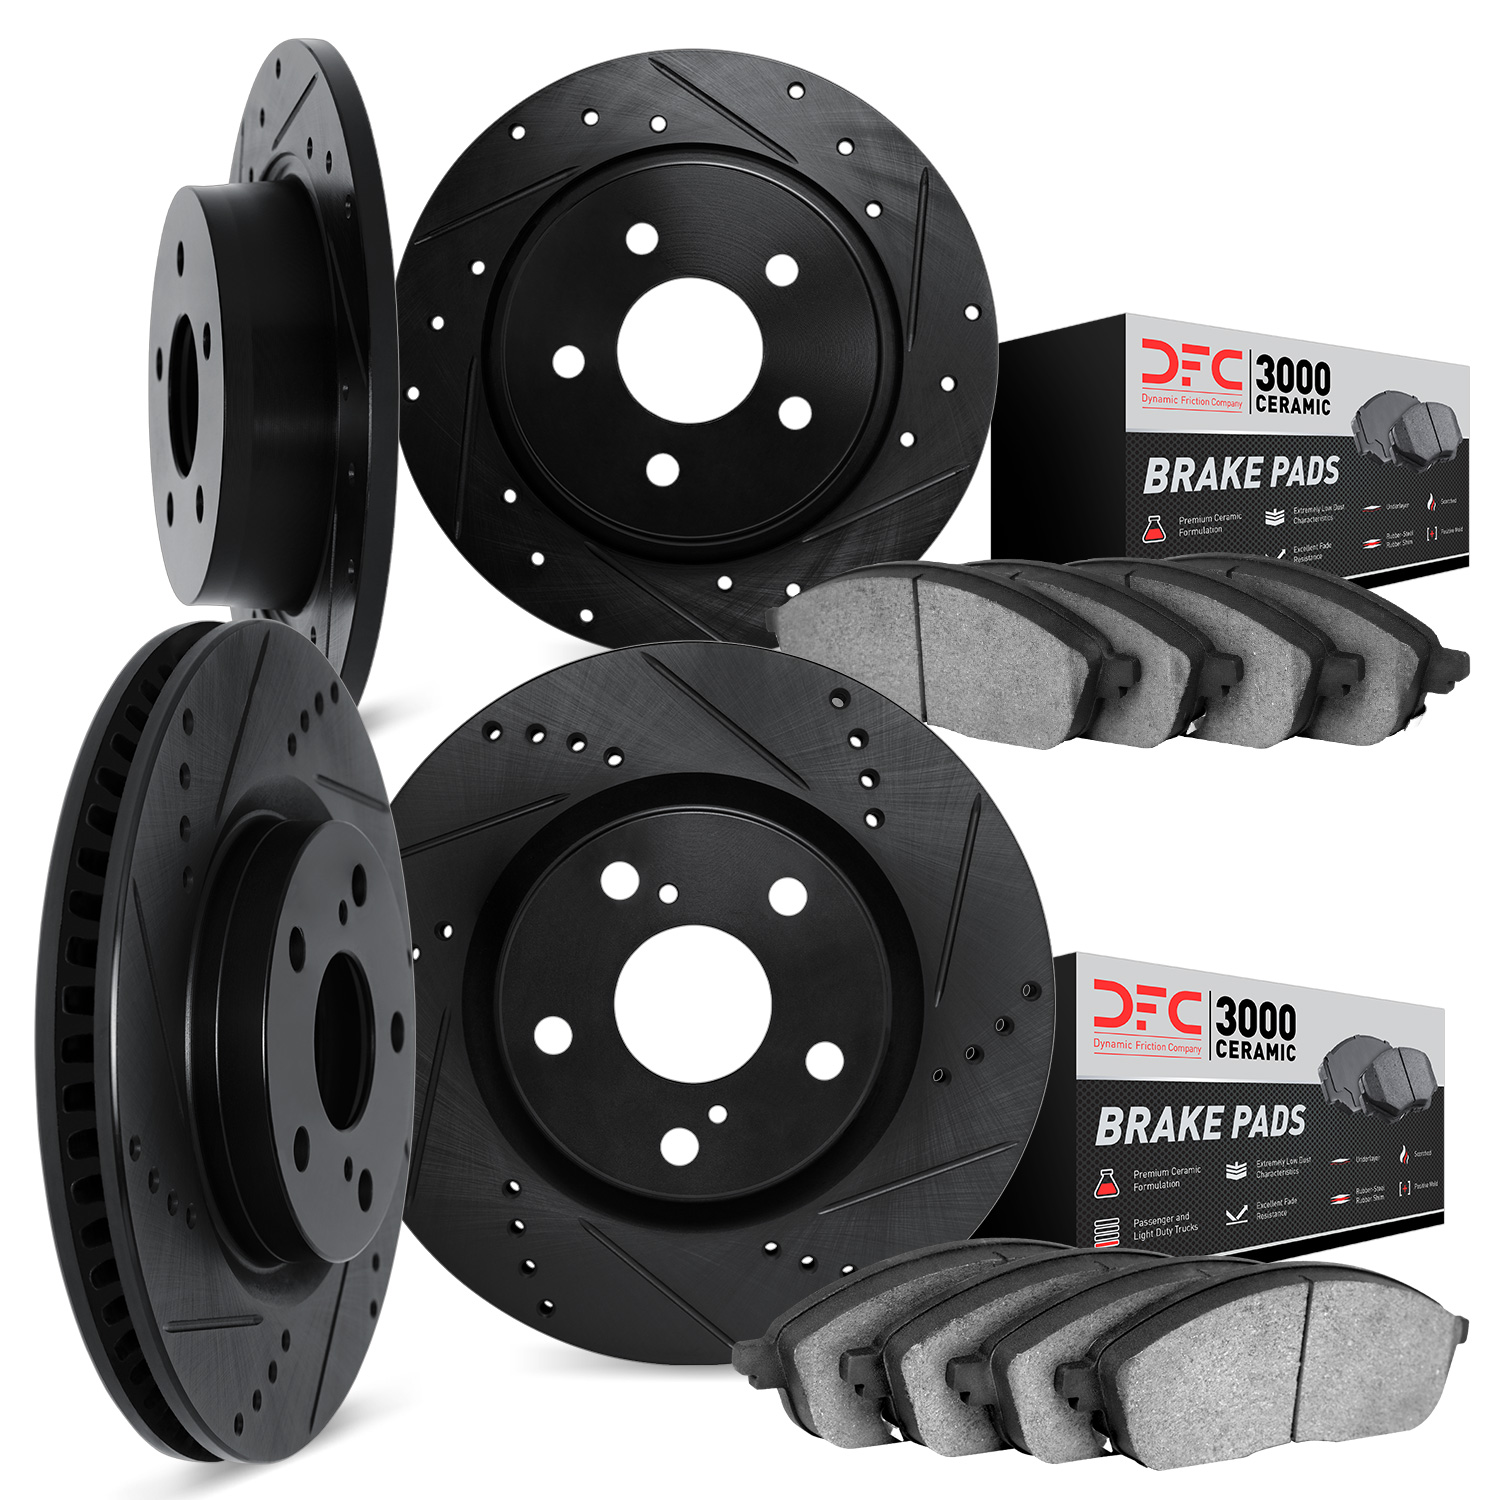 8304-27003 Drilled/Slotted Brake Rotors with 3000-Series Ceramic Brake Pads Kit [Black], 1976-1993 Volvo, Position: Front and Re